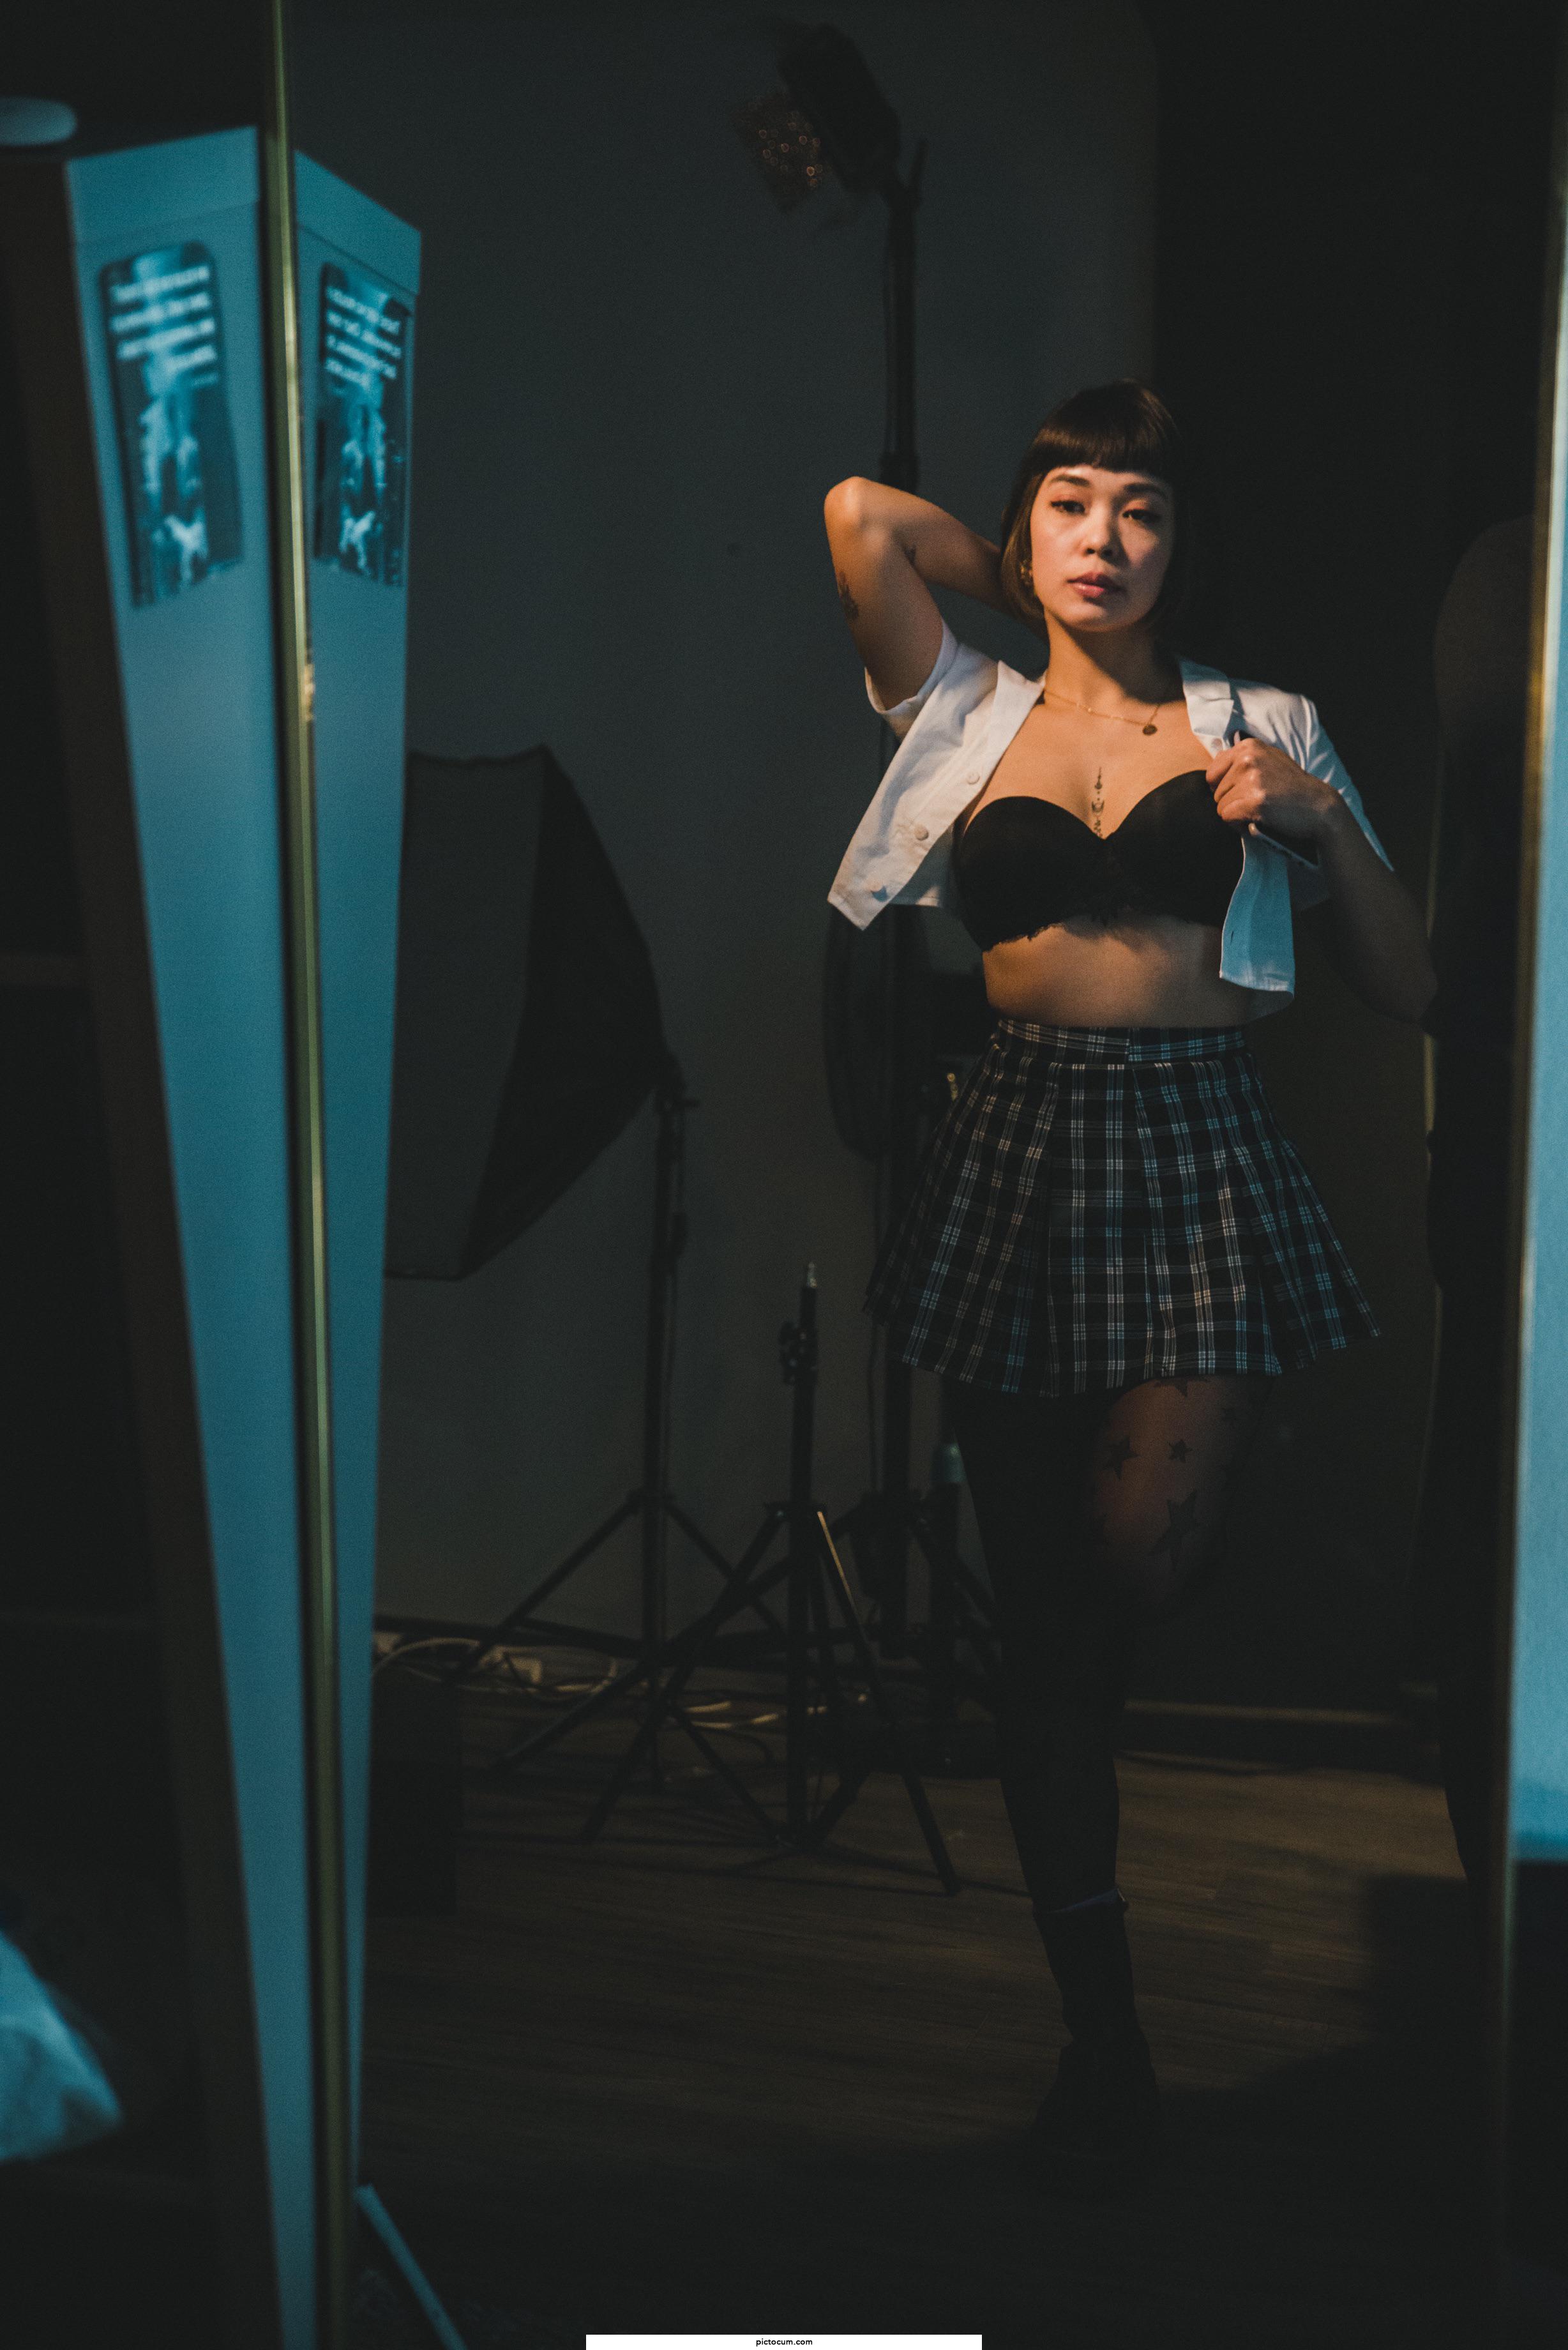 Feeling sexy in this school girl outfit.